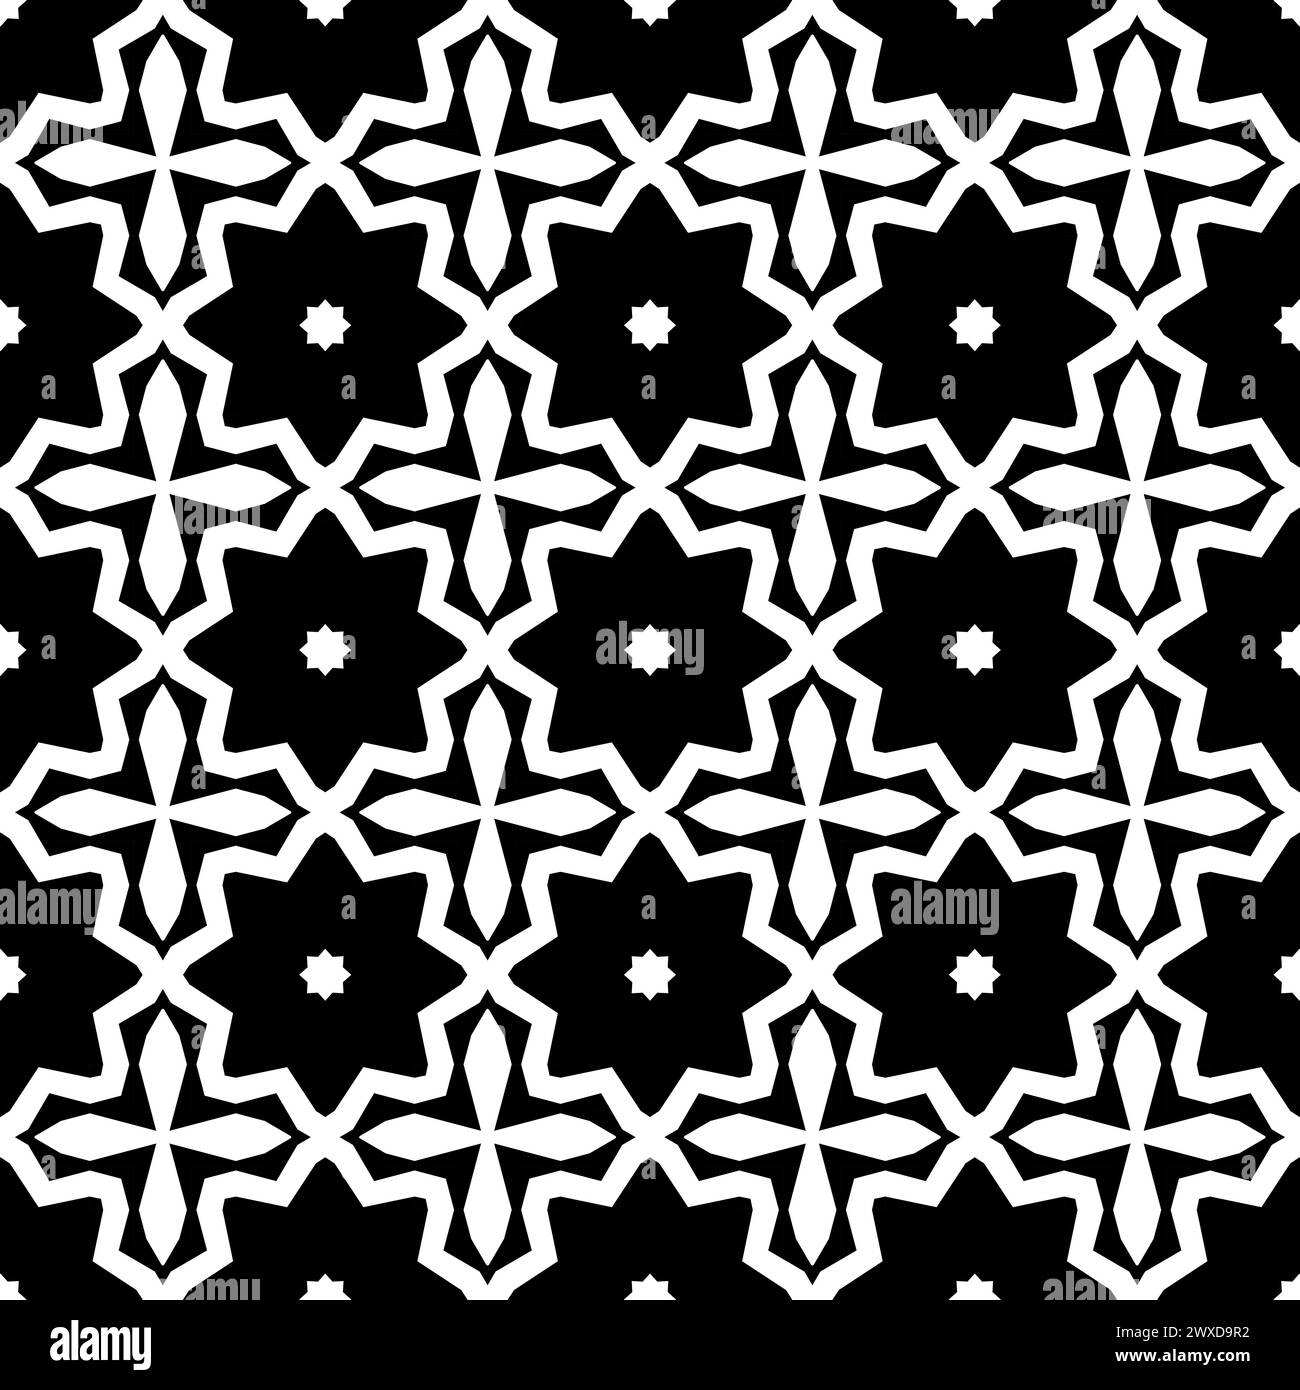 Abstract geometric black and white hipster fashion pillow pattern, black and white doodle fabric decor with exotic luxury forms Stock Photo